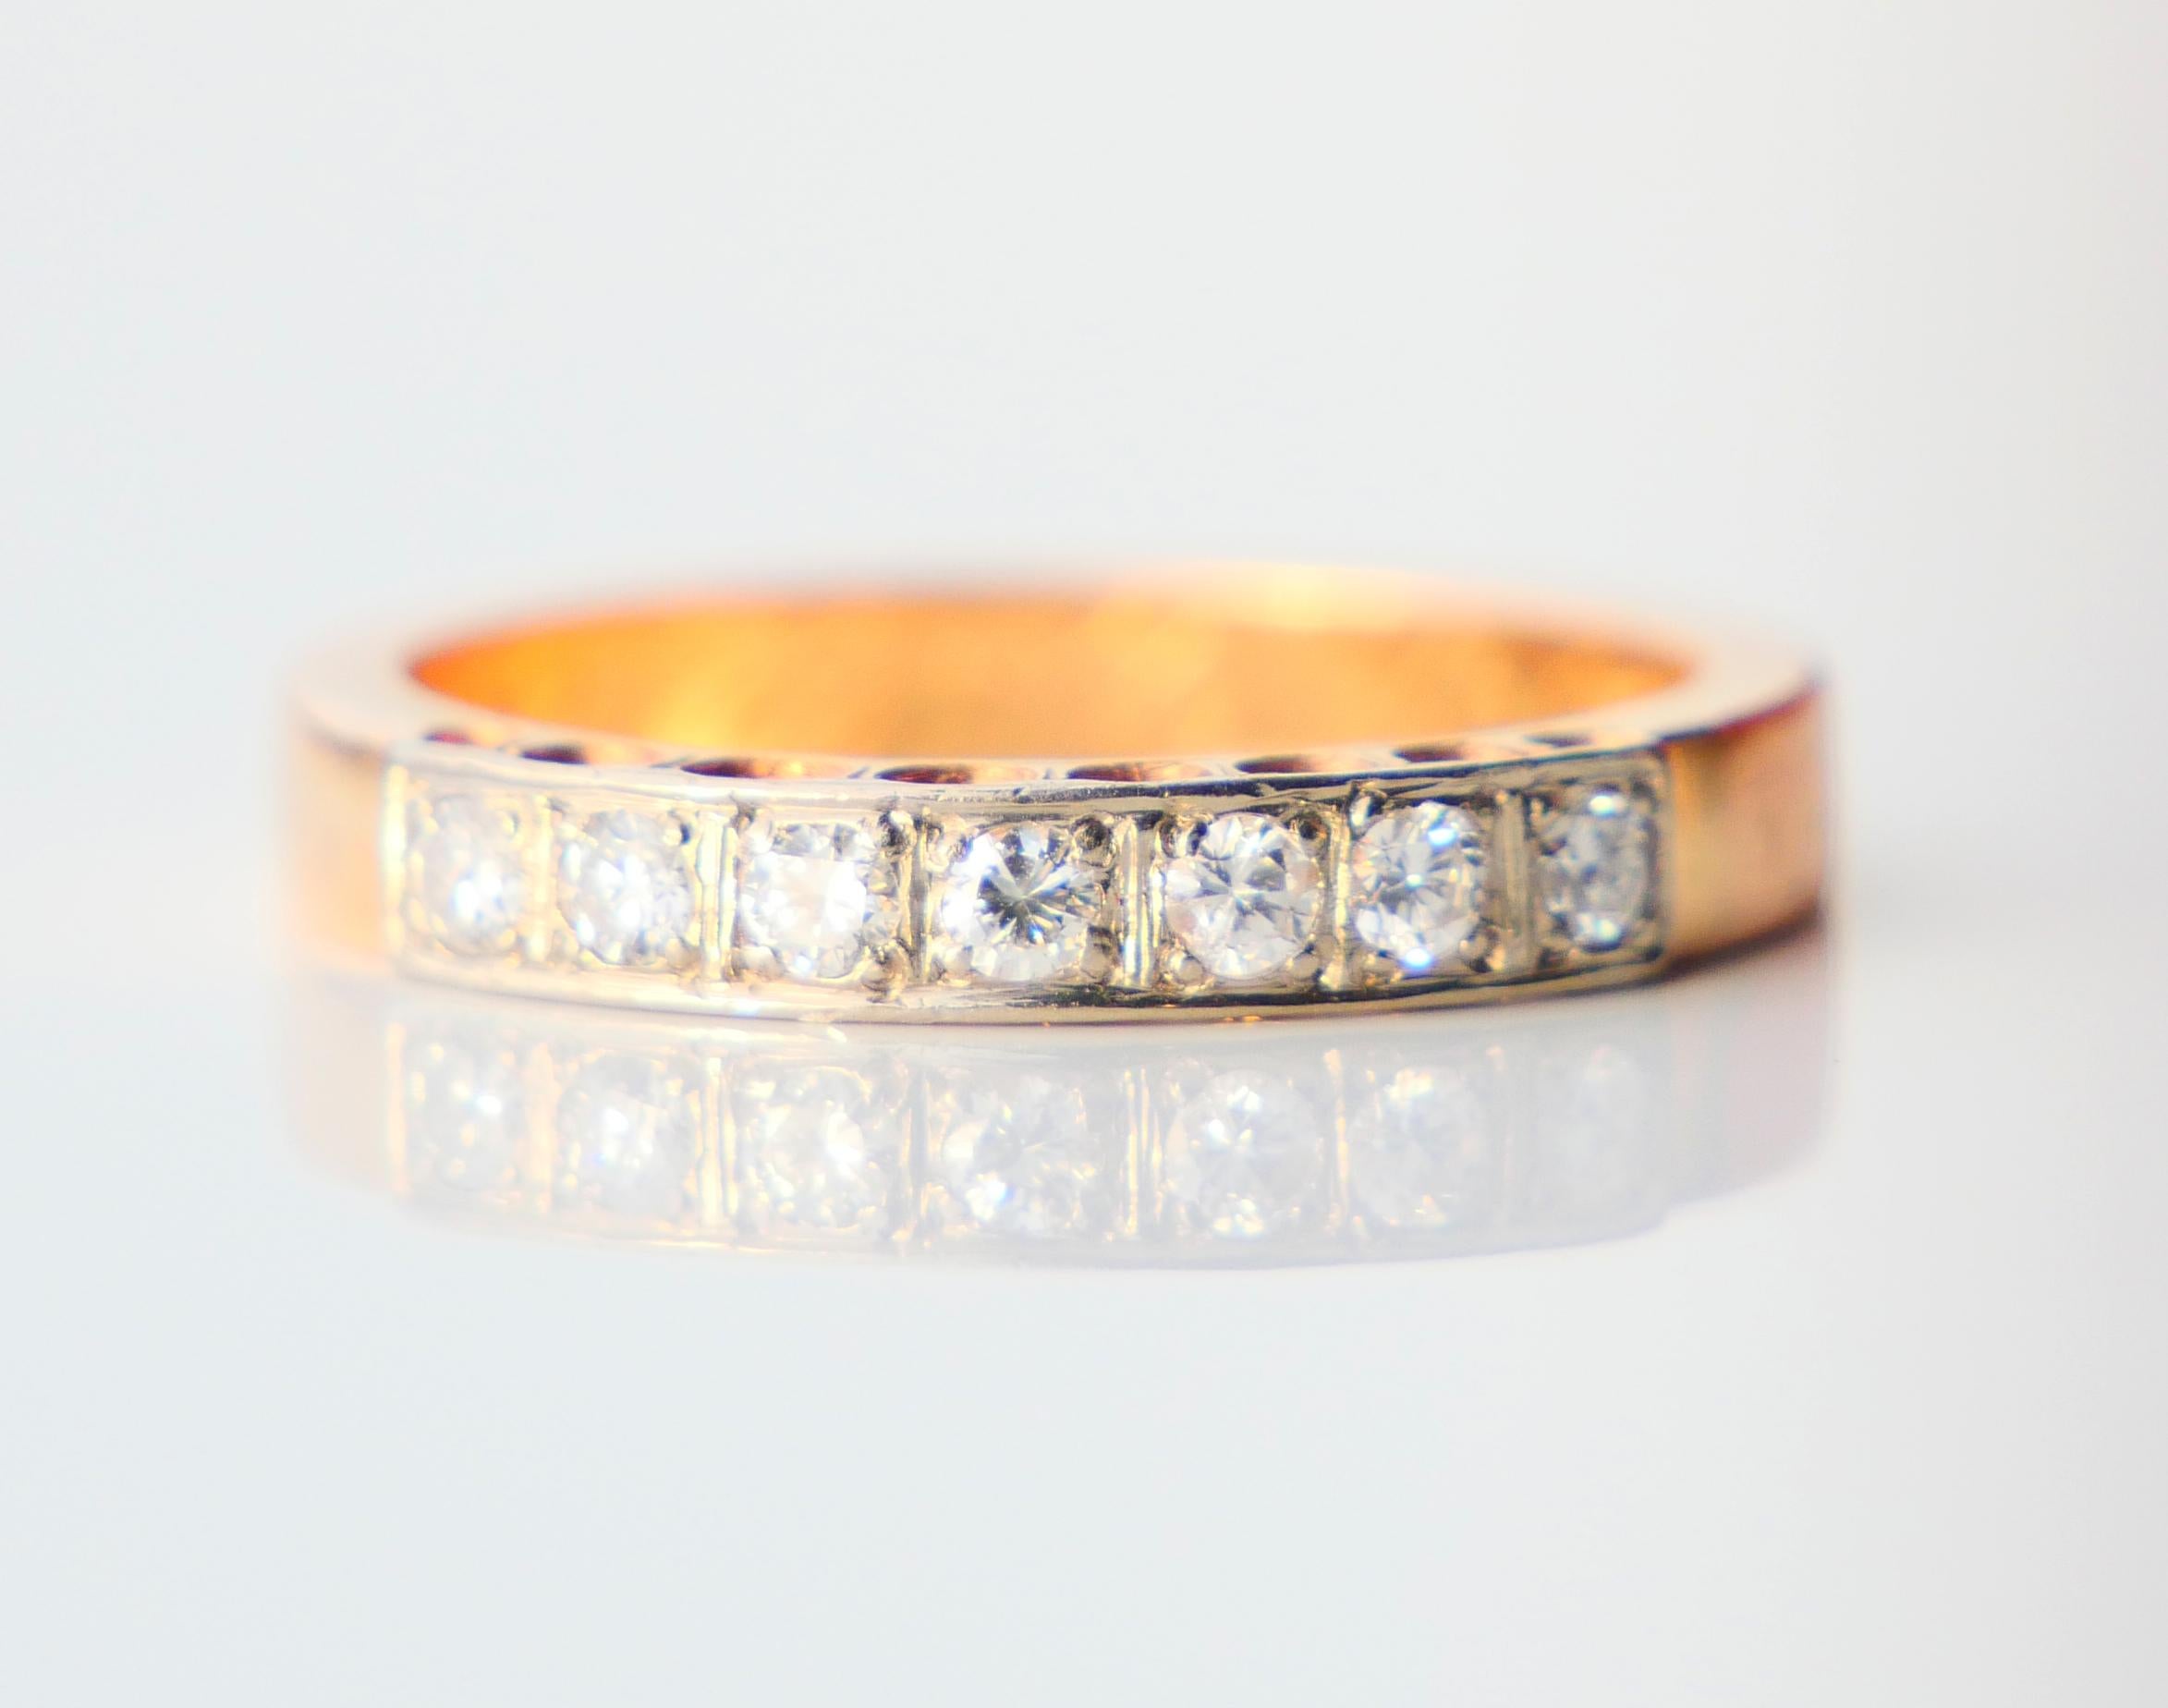 1907 Nordic Alliance Wedding Ring Diamonds solid 20K Gold US6 /4.25gr For Sale 3